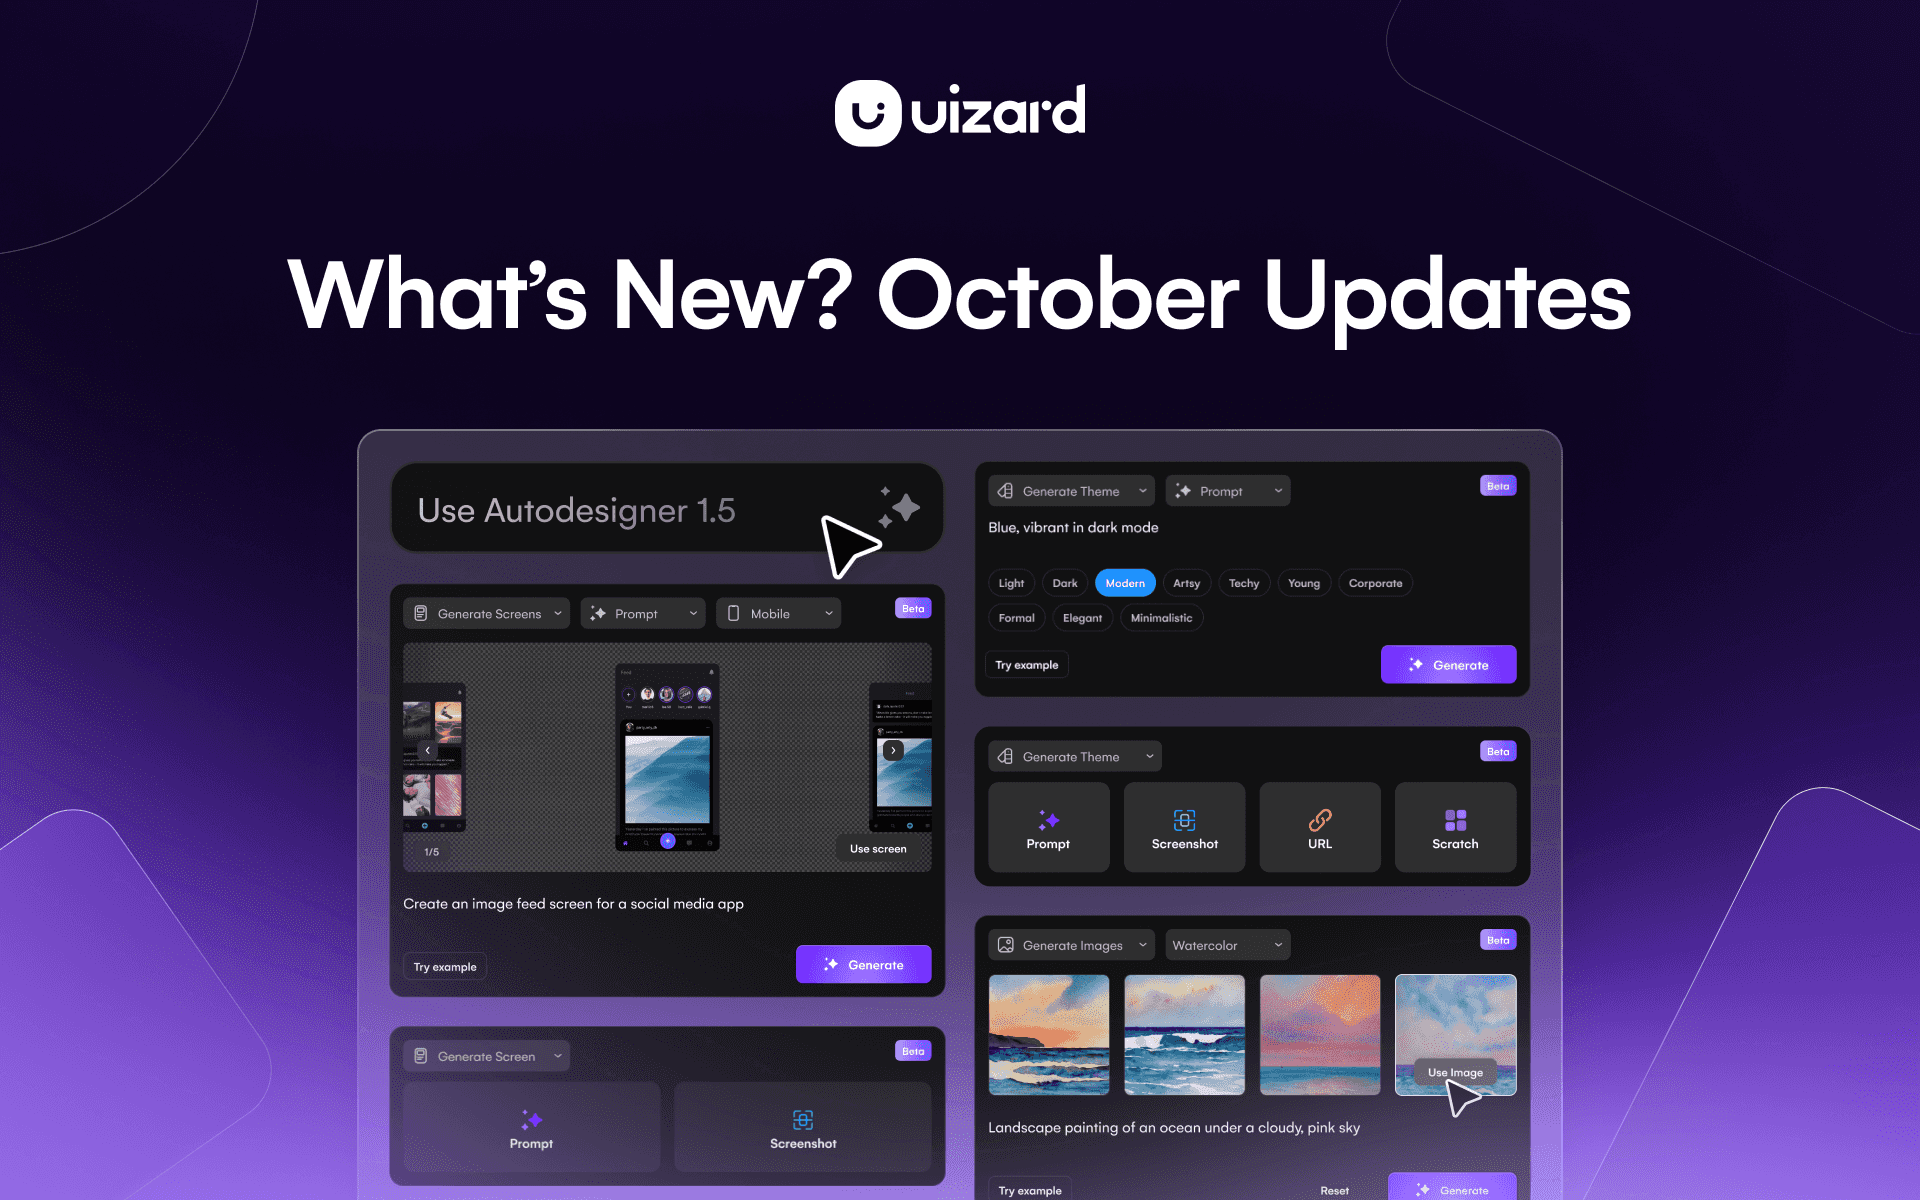 Blog post about the October updates